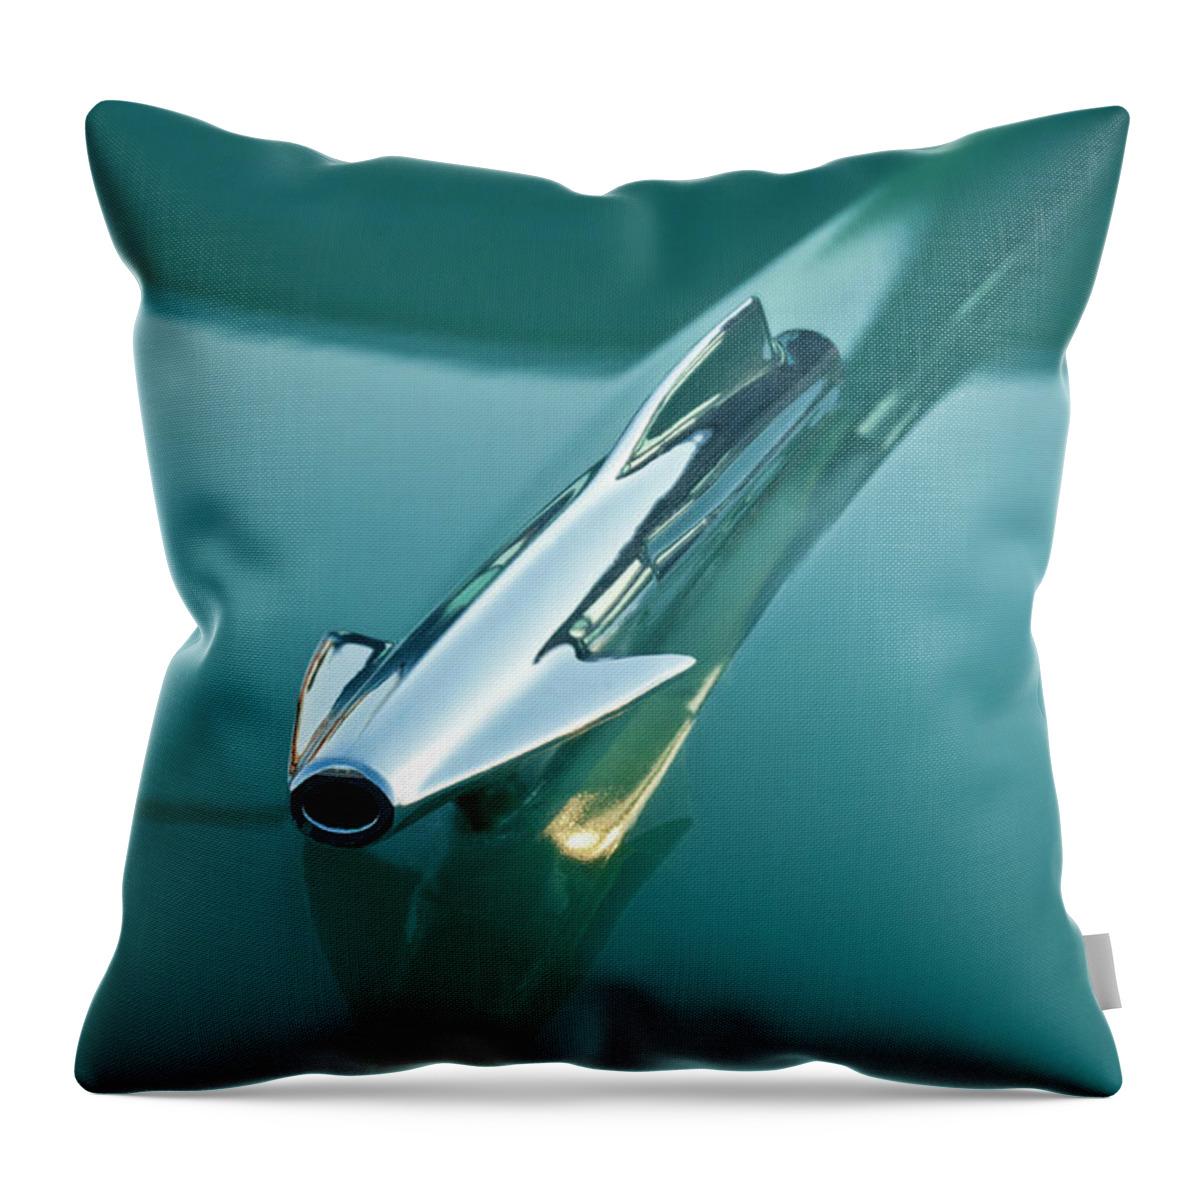 1958 Oldsmobile Throw Pillow featuring the photograph 1958 Oldsmobile 98 Hood Ornament by Jill Reger